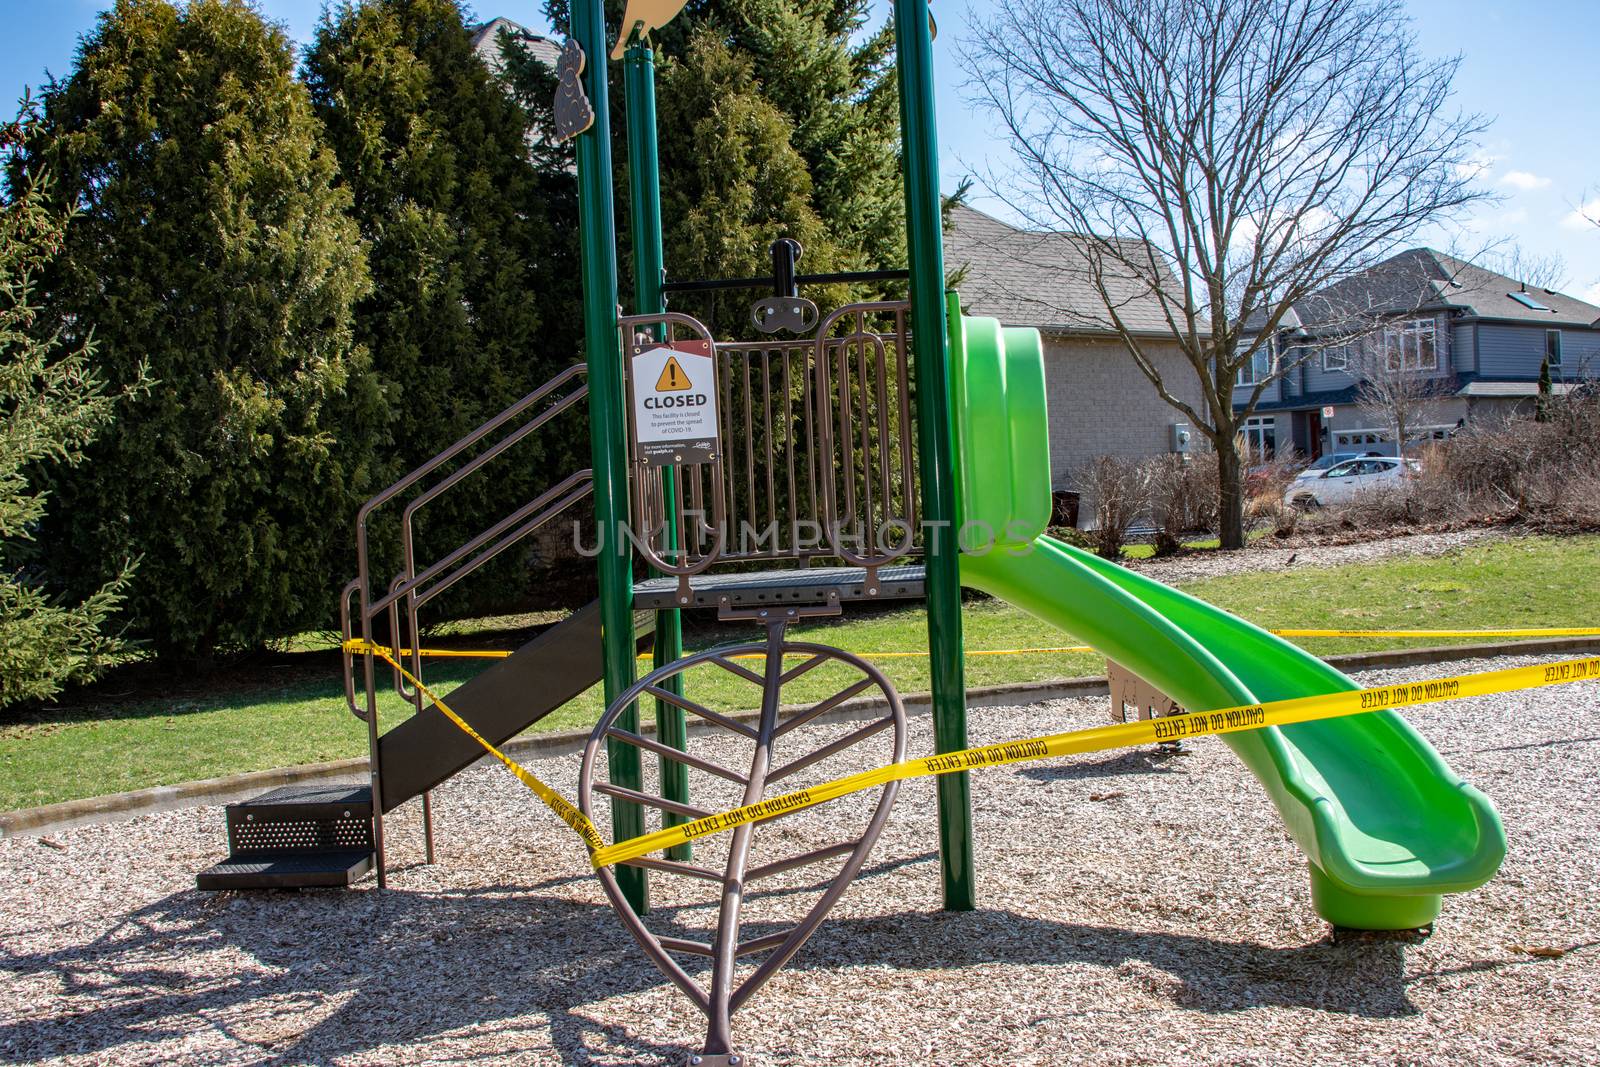 The slide on the playground is surrounded by a yellow ribbon and a warning plate has been installed on closing for the period of quarantine